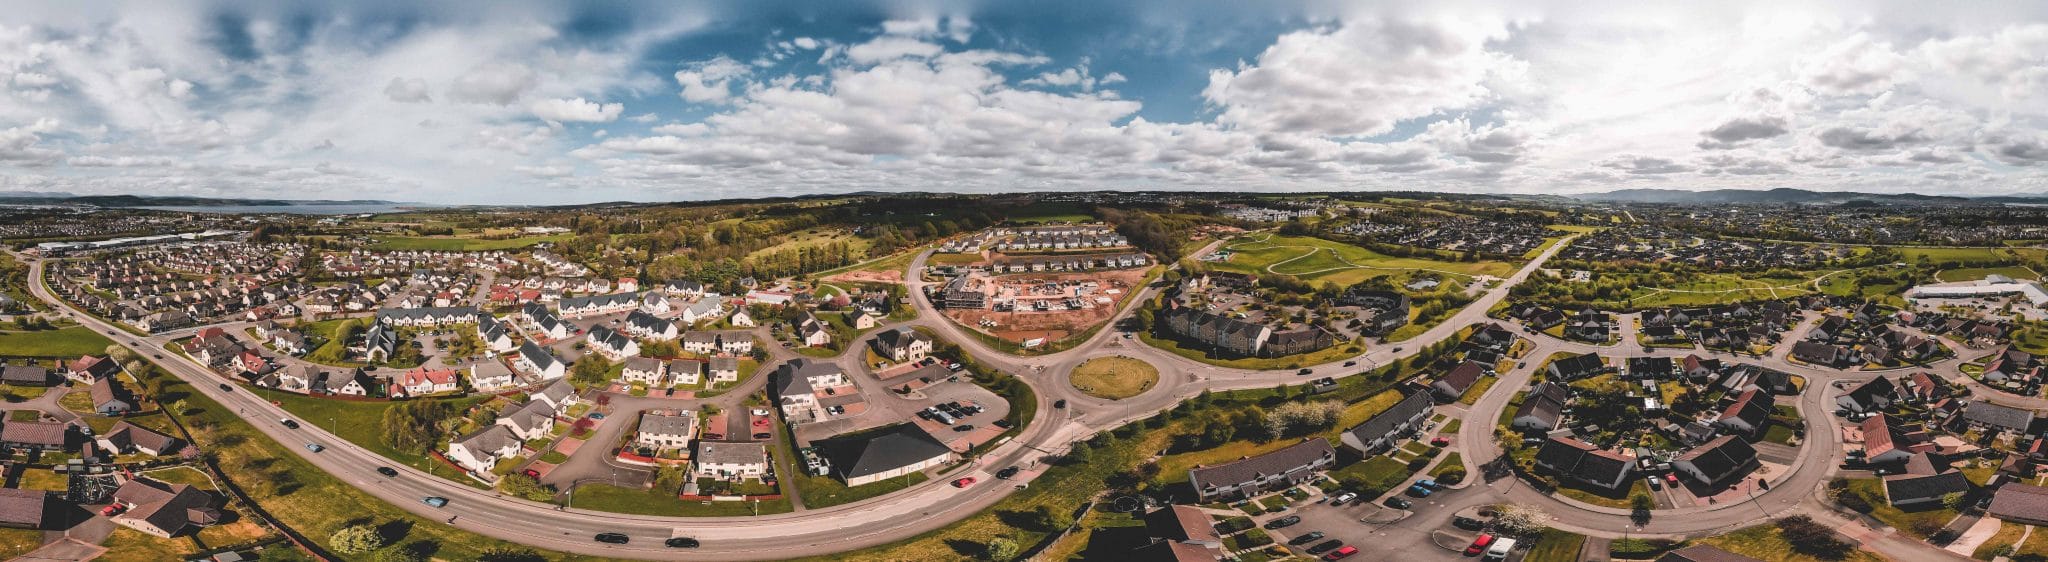 Aerial Photography - Inverness Tulloch Homes Wester Inshes Panorama